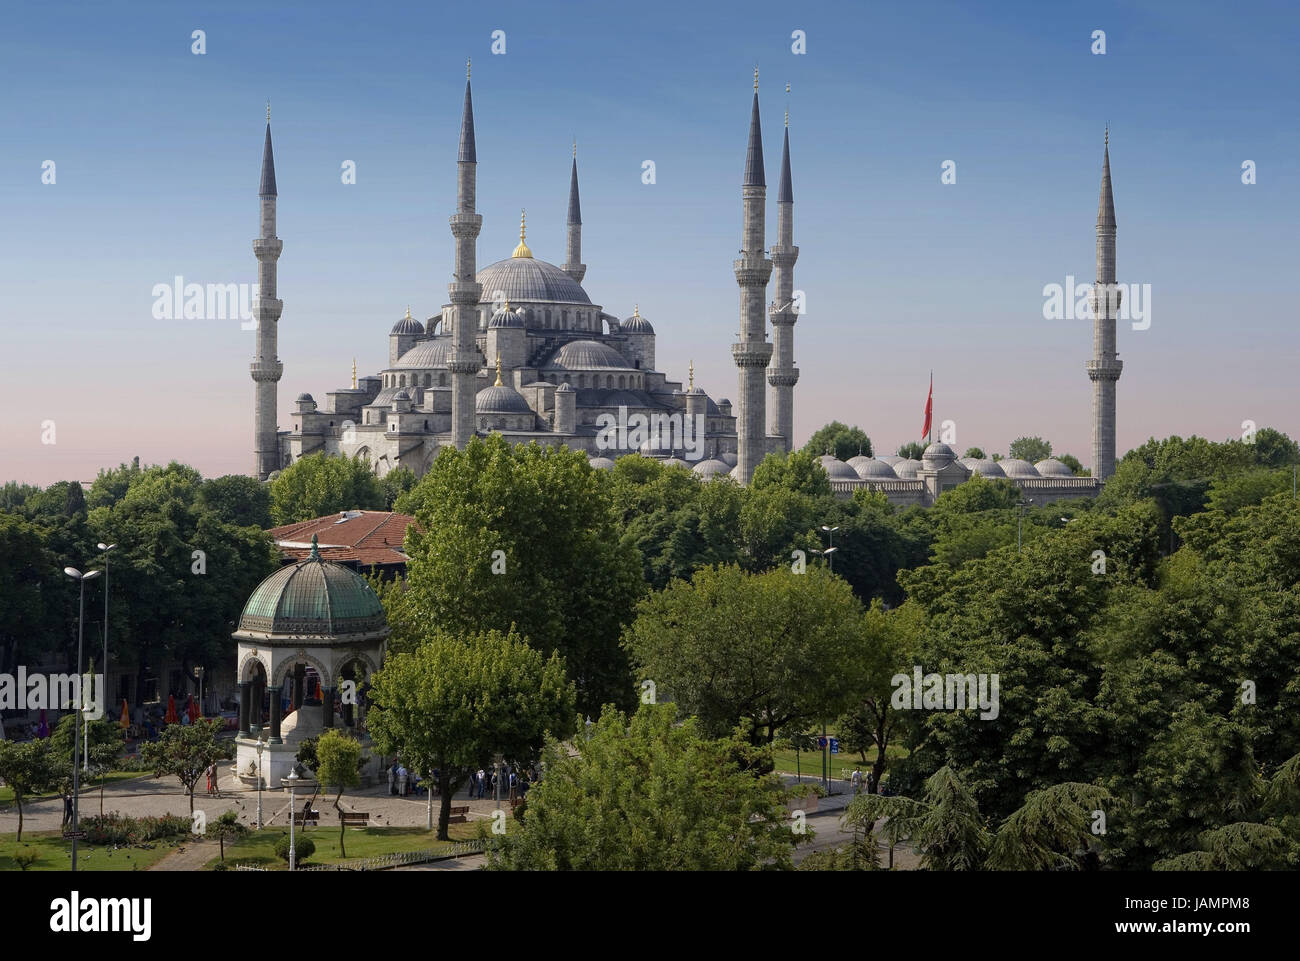 Turkey,Istanbul,sultan Ahmet Camii,'blue mosque',park,trees,town,city,metropolis,port,culture,faith,religion,Islam,structure,historically,architecture,church,sacred construction,Sultan-Ahmet-Camii,sultan's Ahmed's mosque,mosque,domed building,towers,landmarks,places of interest,minarets,domes,outside,cloudless,heaven, Stock Photo